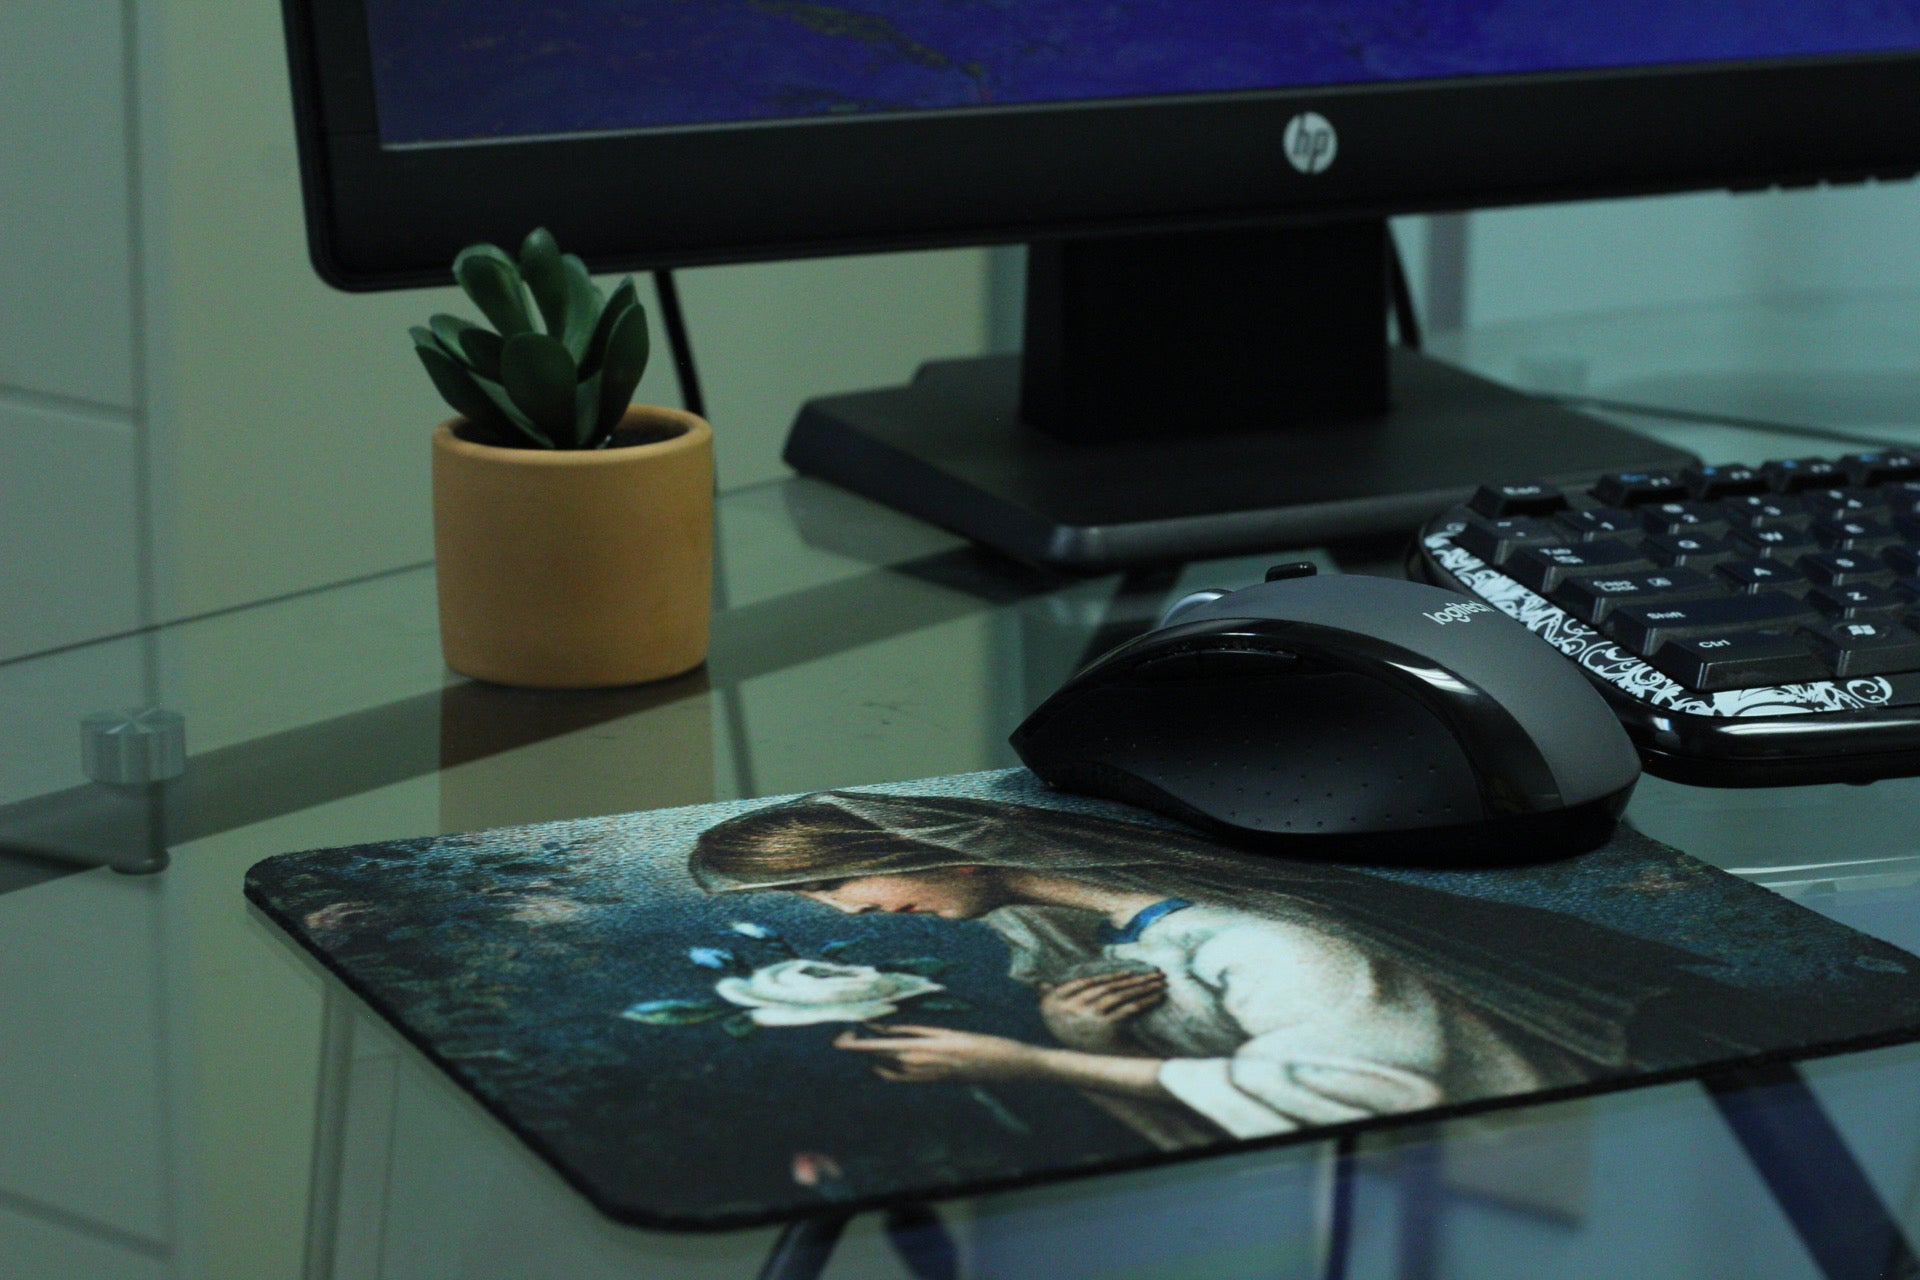 Our Lady of the Mystical Rose Mouse Pad